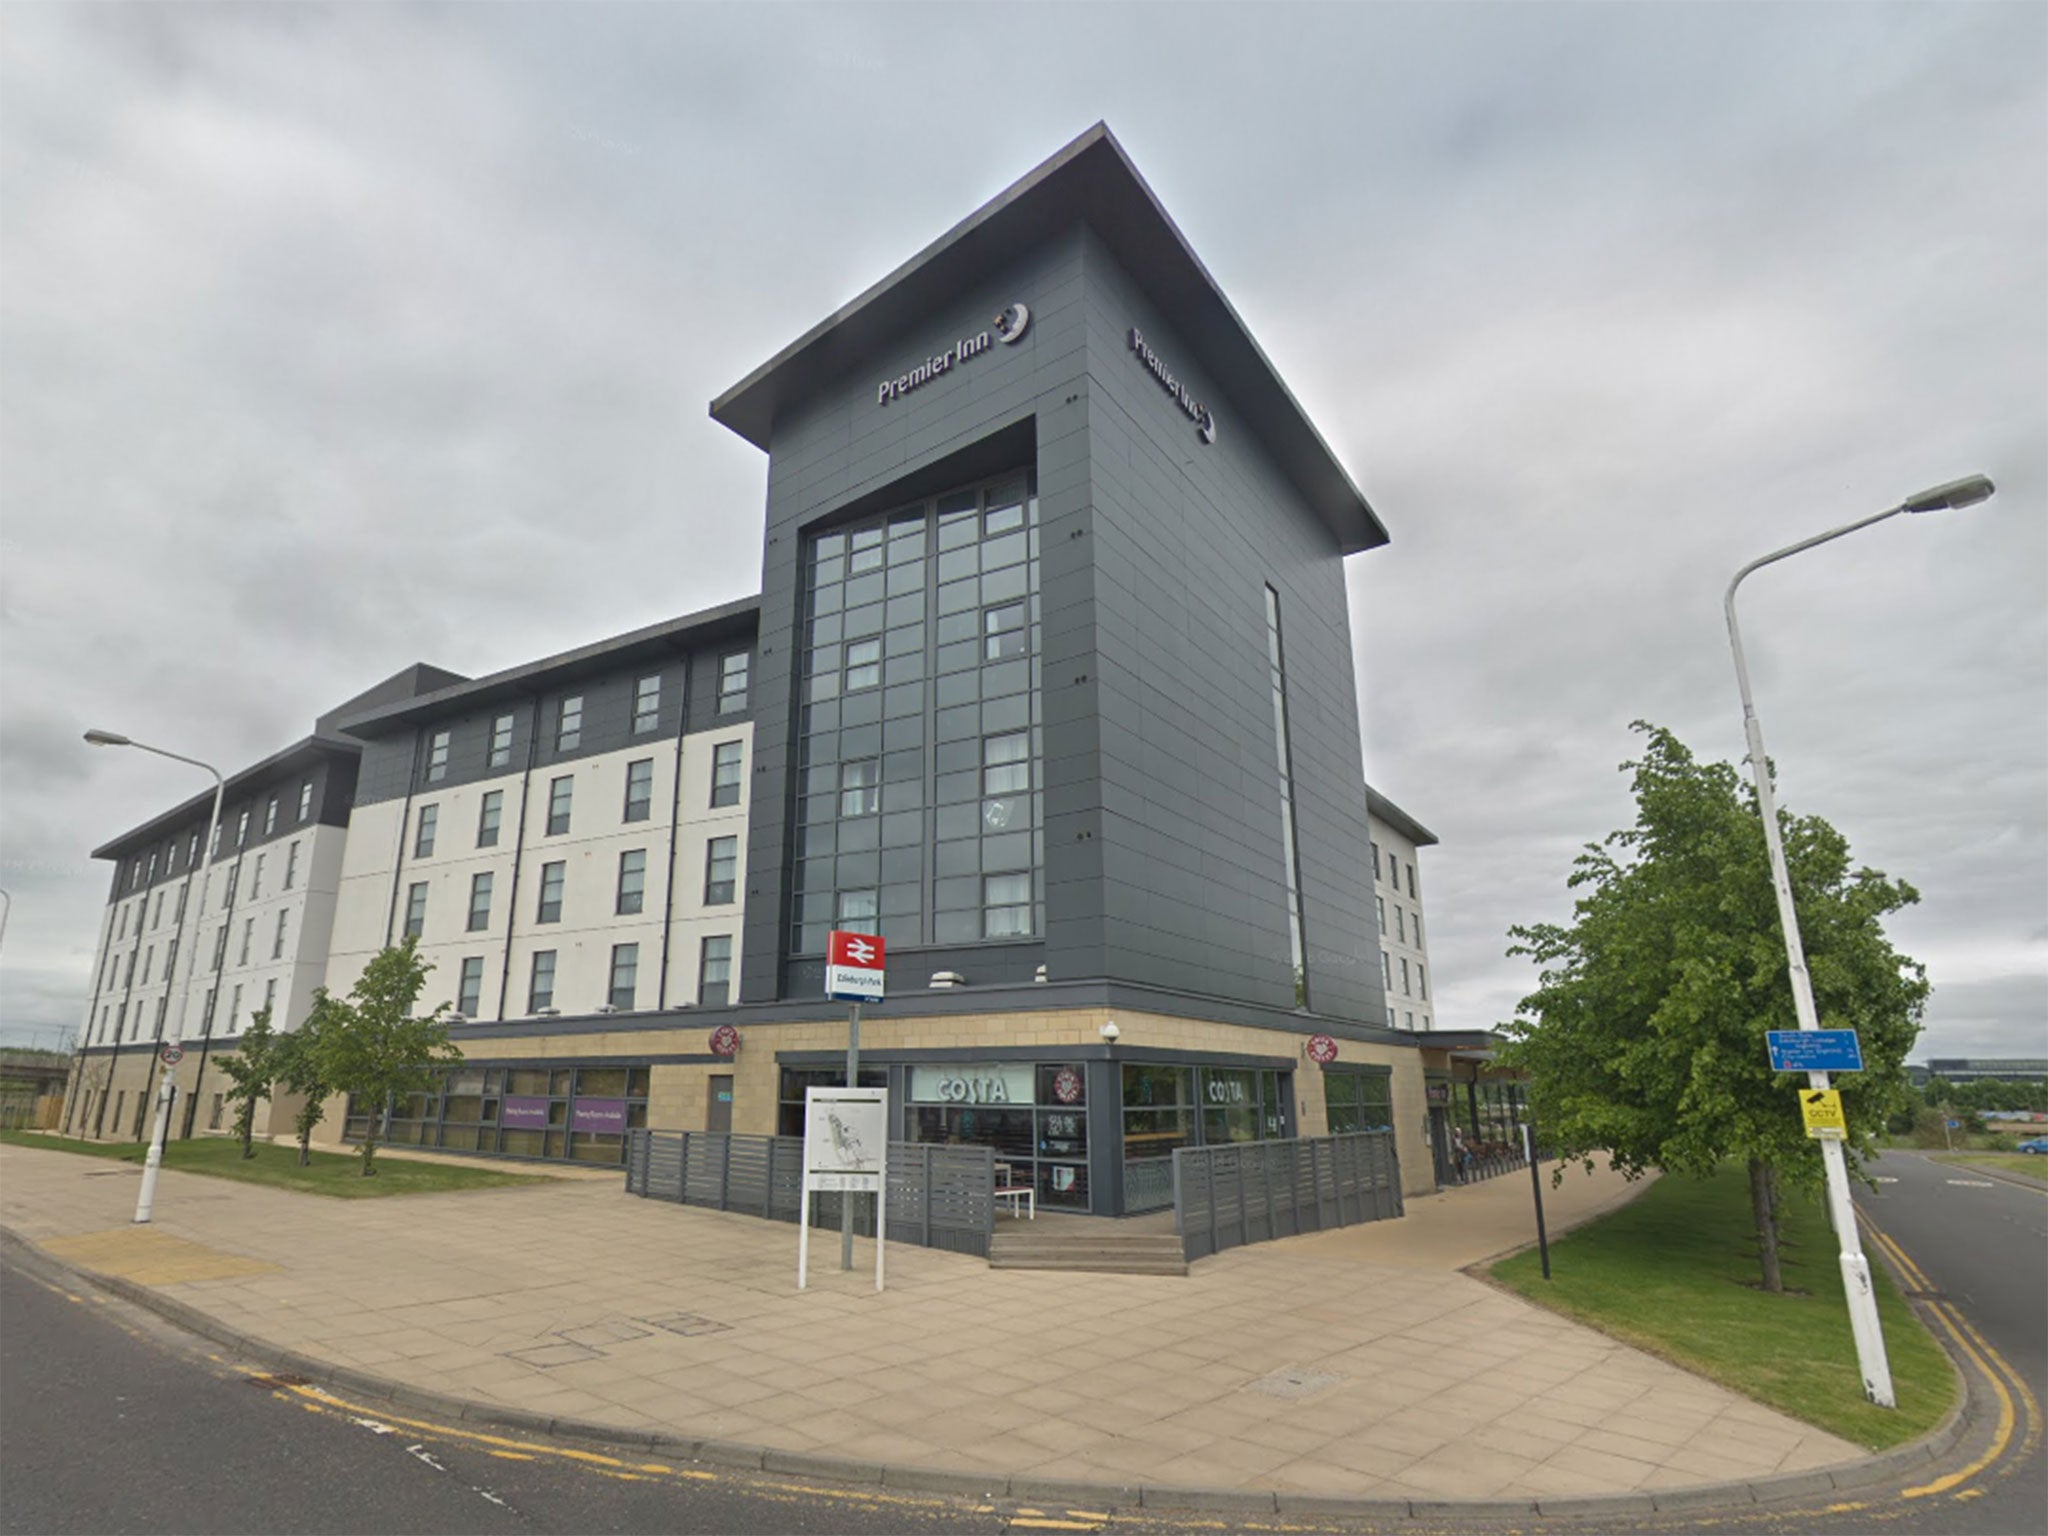 The Premier Inn in Edinburgh Park, which is the first in Britain to be able to run off battery power